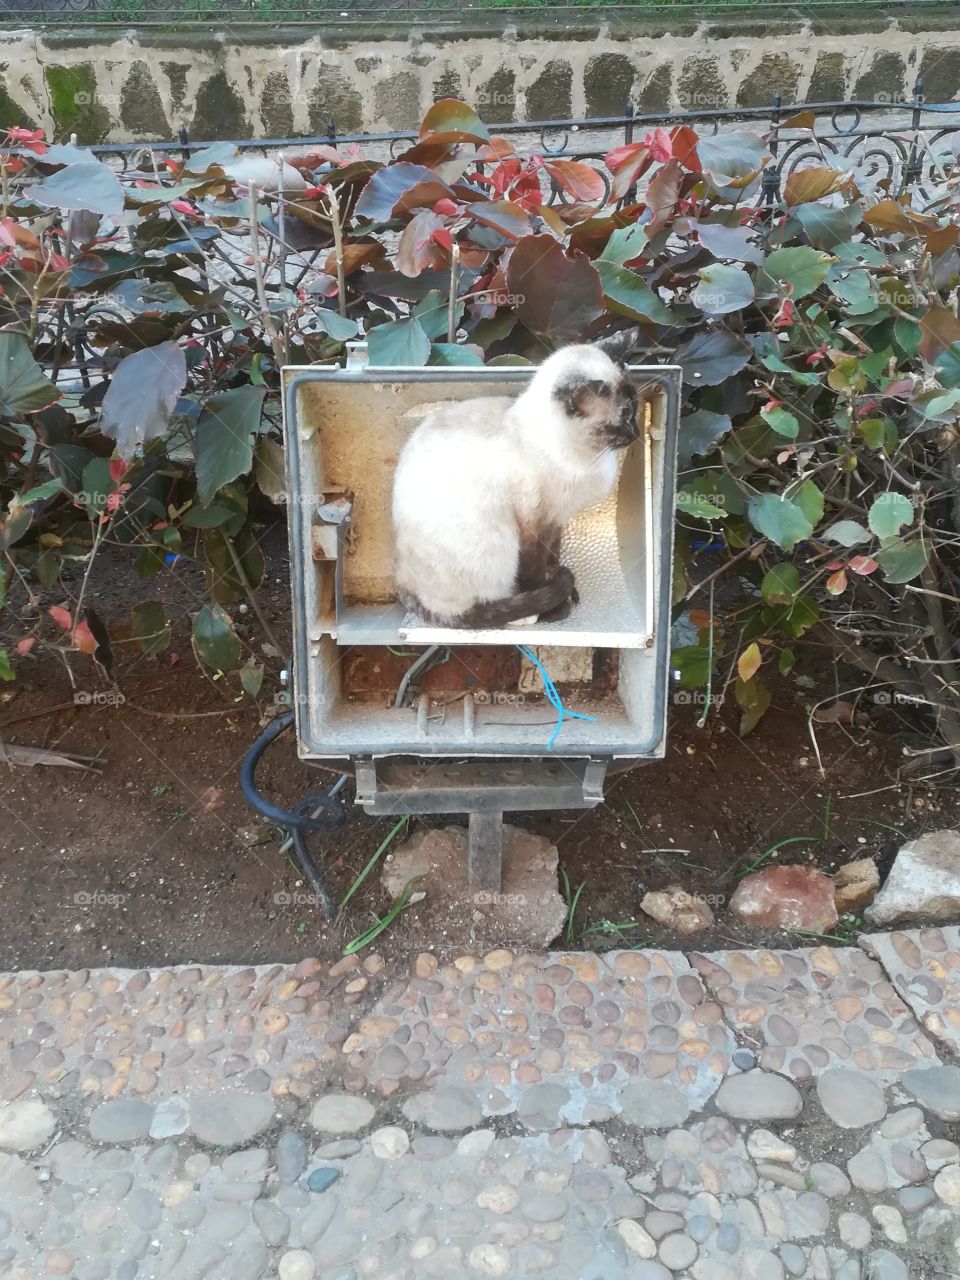 Cats everywhere in Morocco, even where least expected. Andalusian gardens, winter 2019, Rabat.